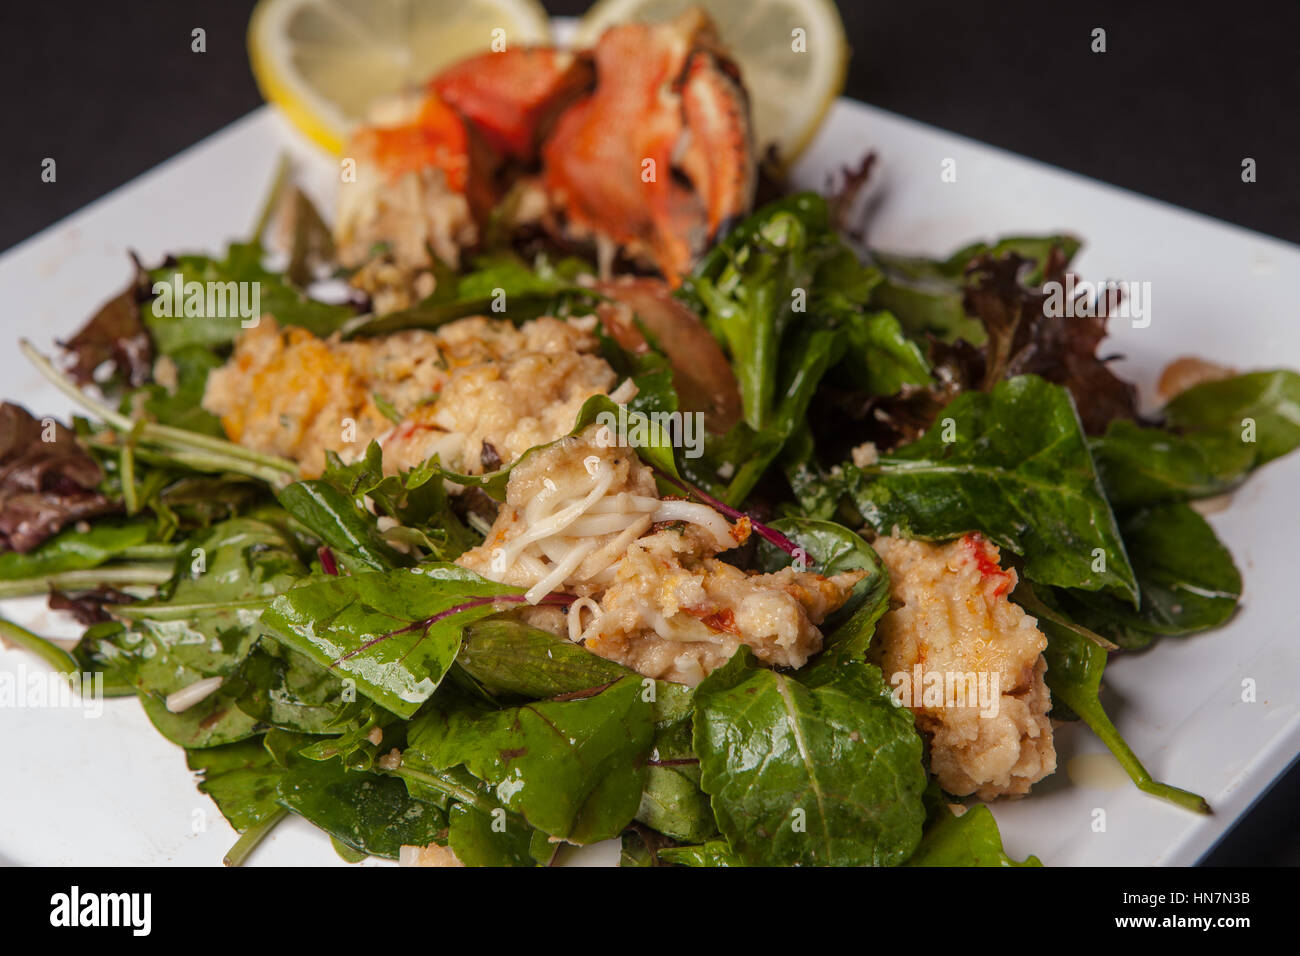 Crab Salad on a bed of spring mix greens with olive oil Stock Photo